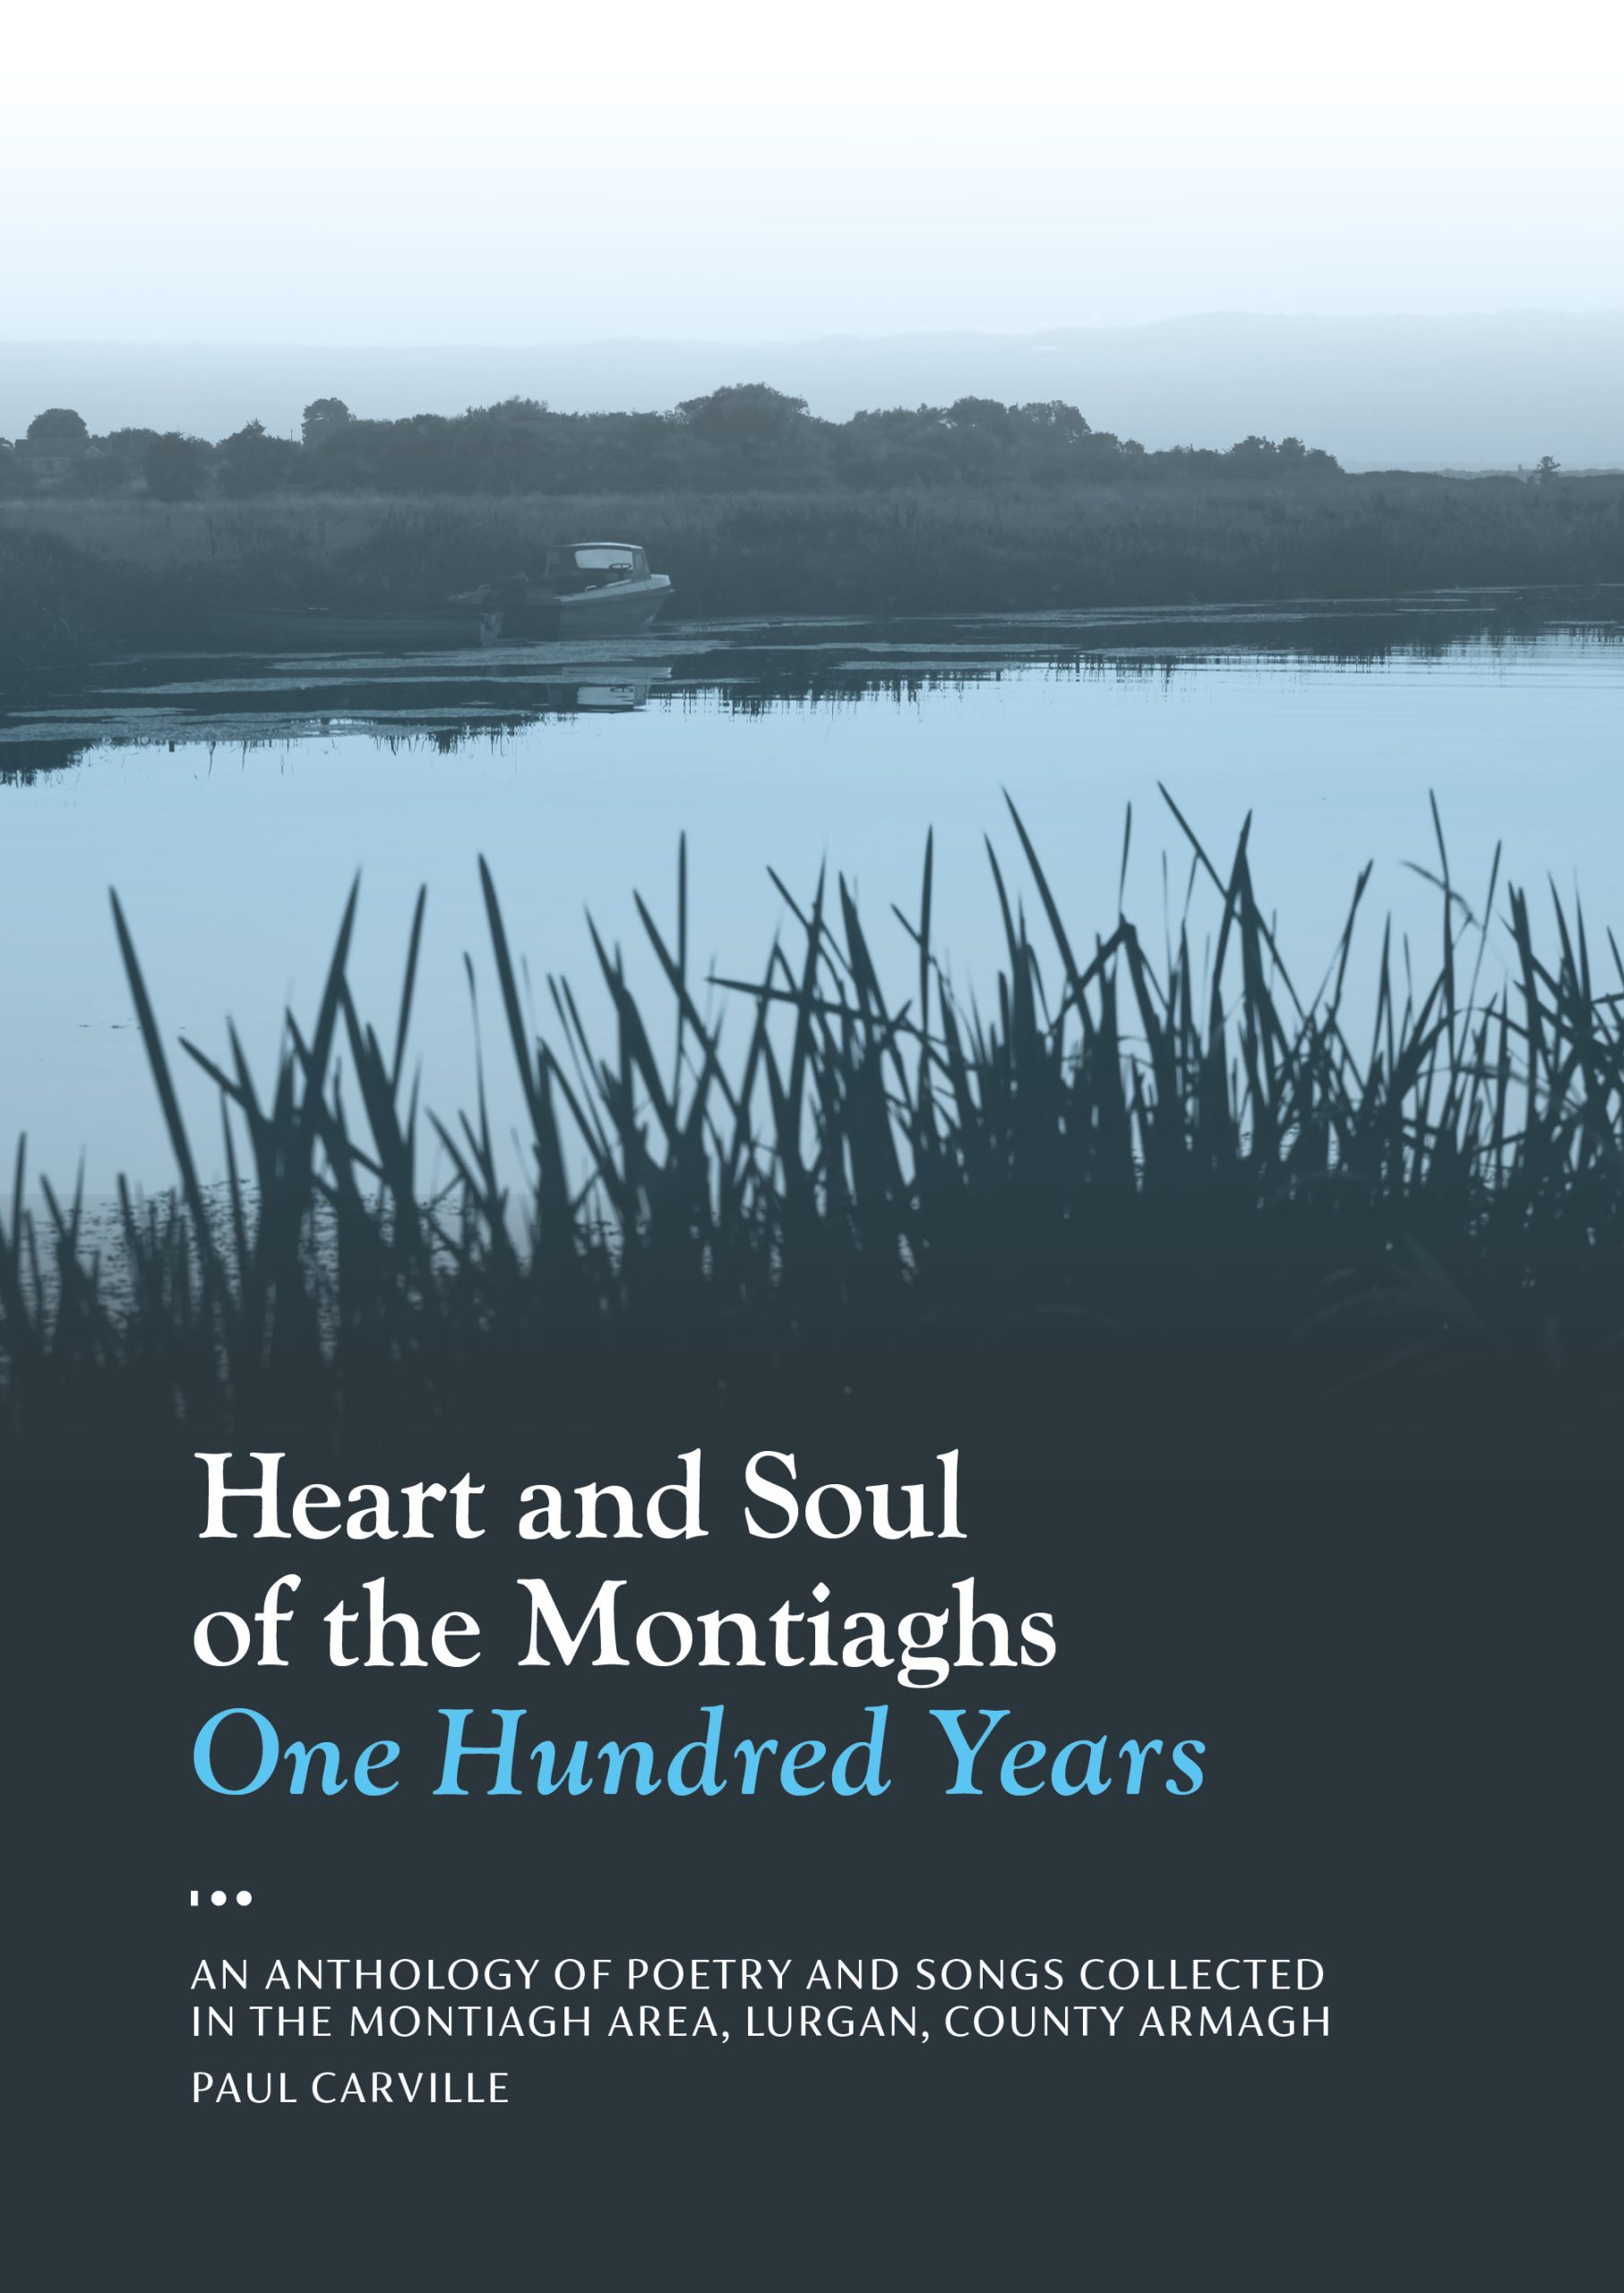 1 February 2022: Public Launch of ‘Heart and Soul of Montiaghs’ Book